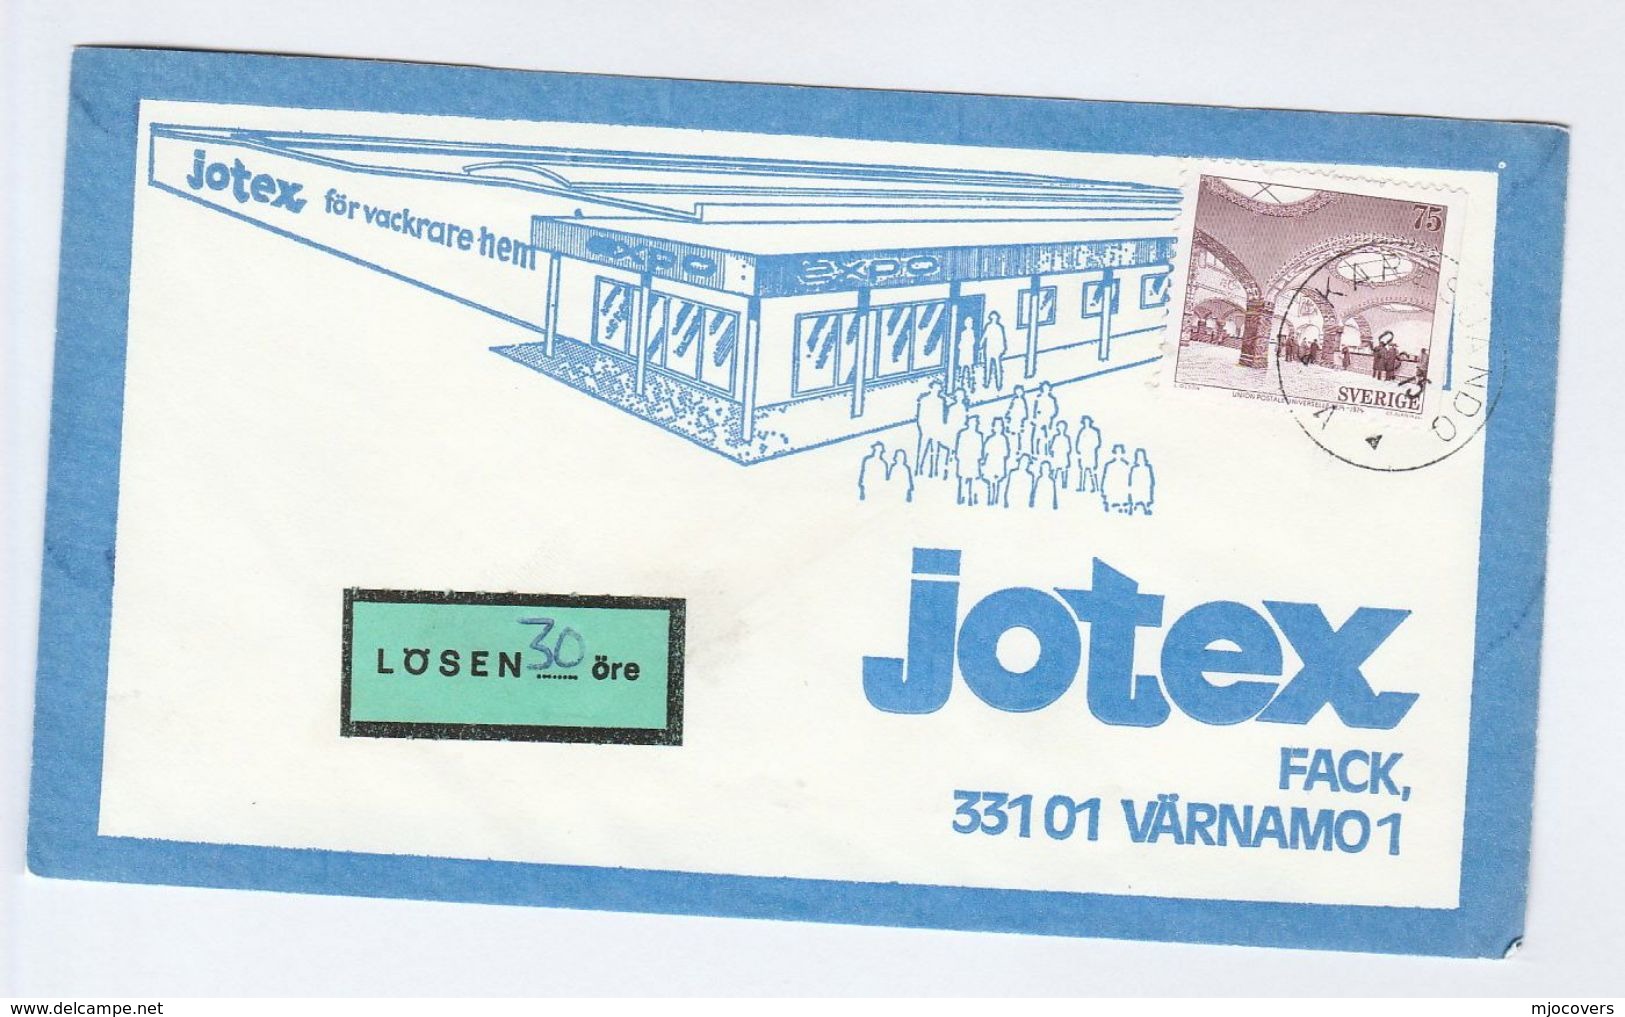 1975 LOSEN 30 Ore POST DUE LABEL On SWEDEN Illus ADVERT COVER  JOTEK For Beautiful Homes, Stamps - Covers & Documents